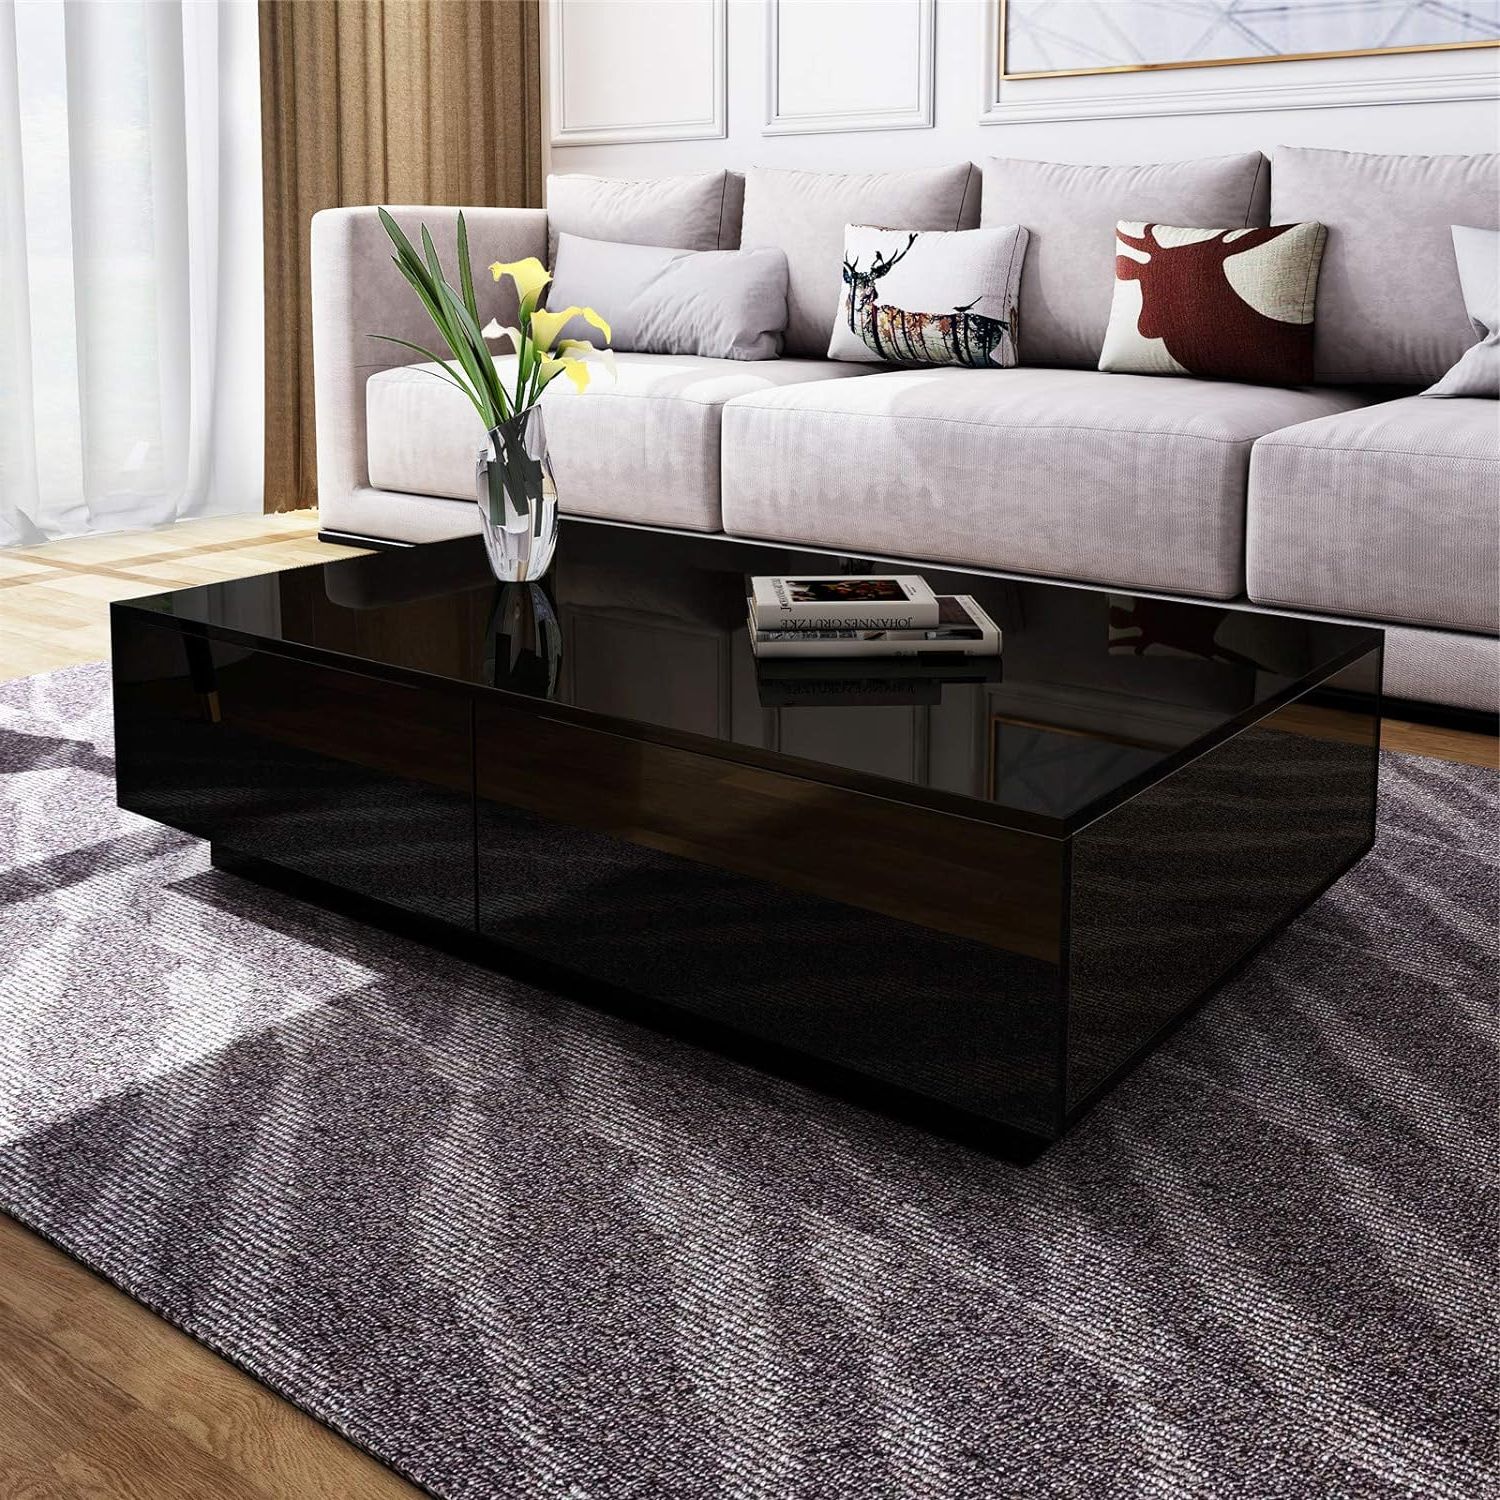 Well Liked Modern Rectangle Coffee Tea Table High Gloss Coffee Table With 4 In Rectangle Coffee Tables (View 14 of 15)